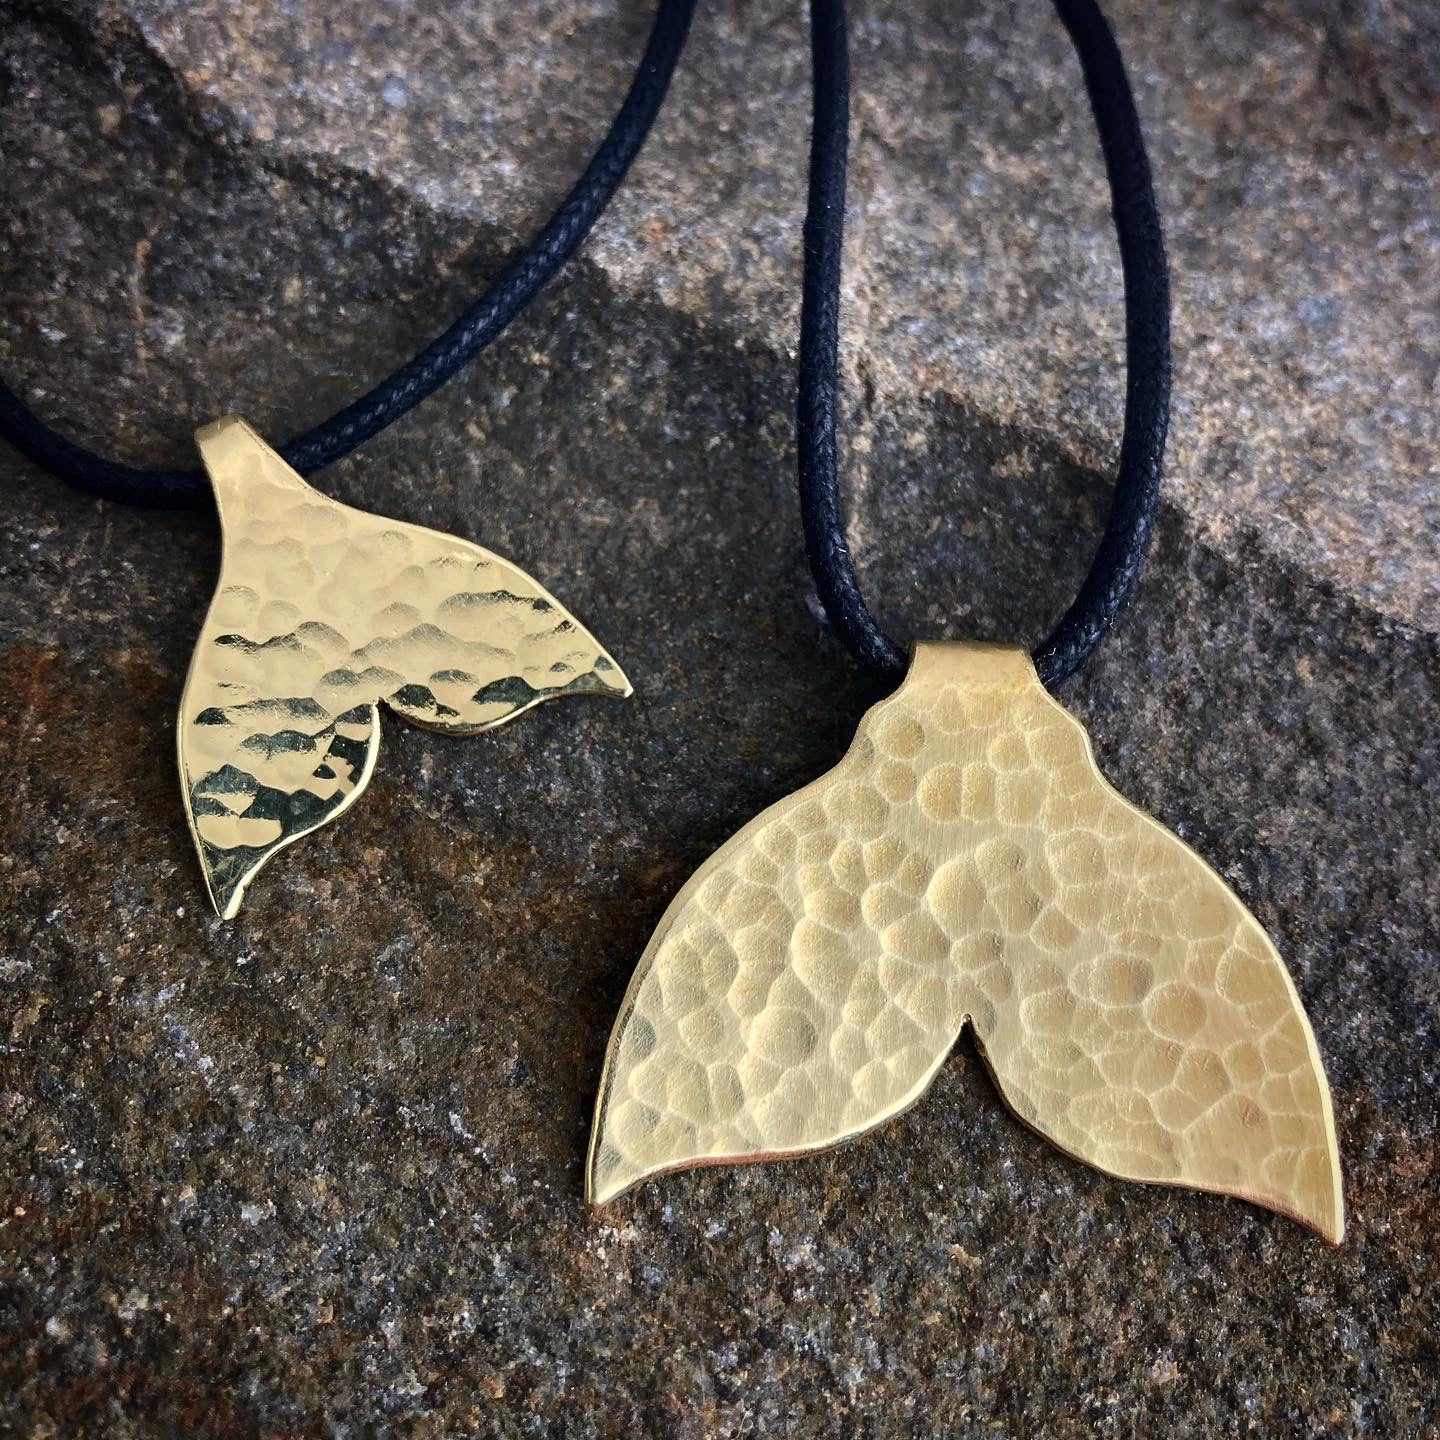 The golden whale tail pendants